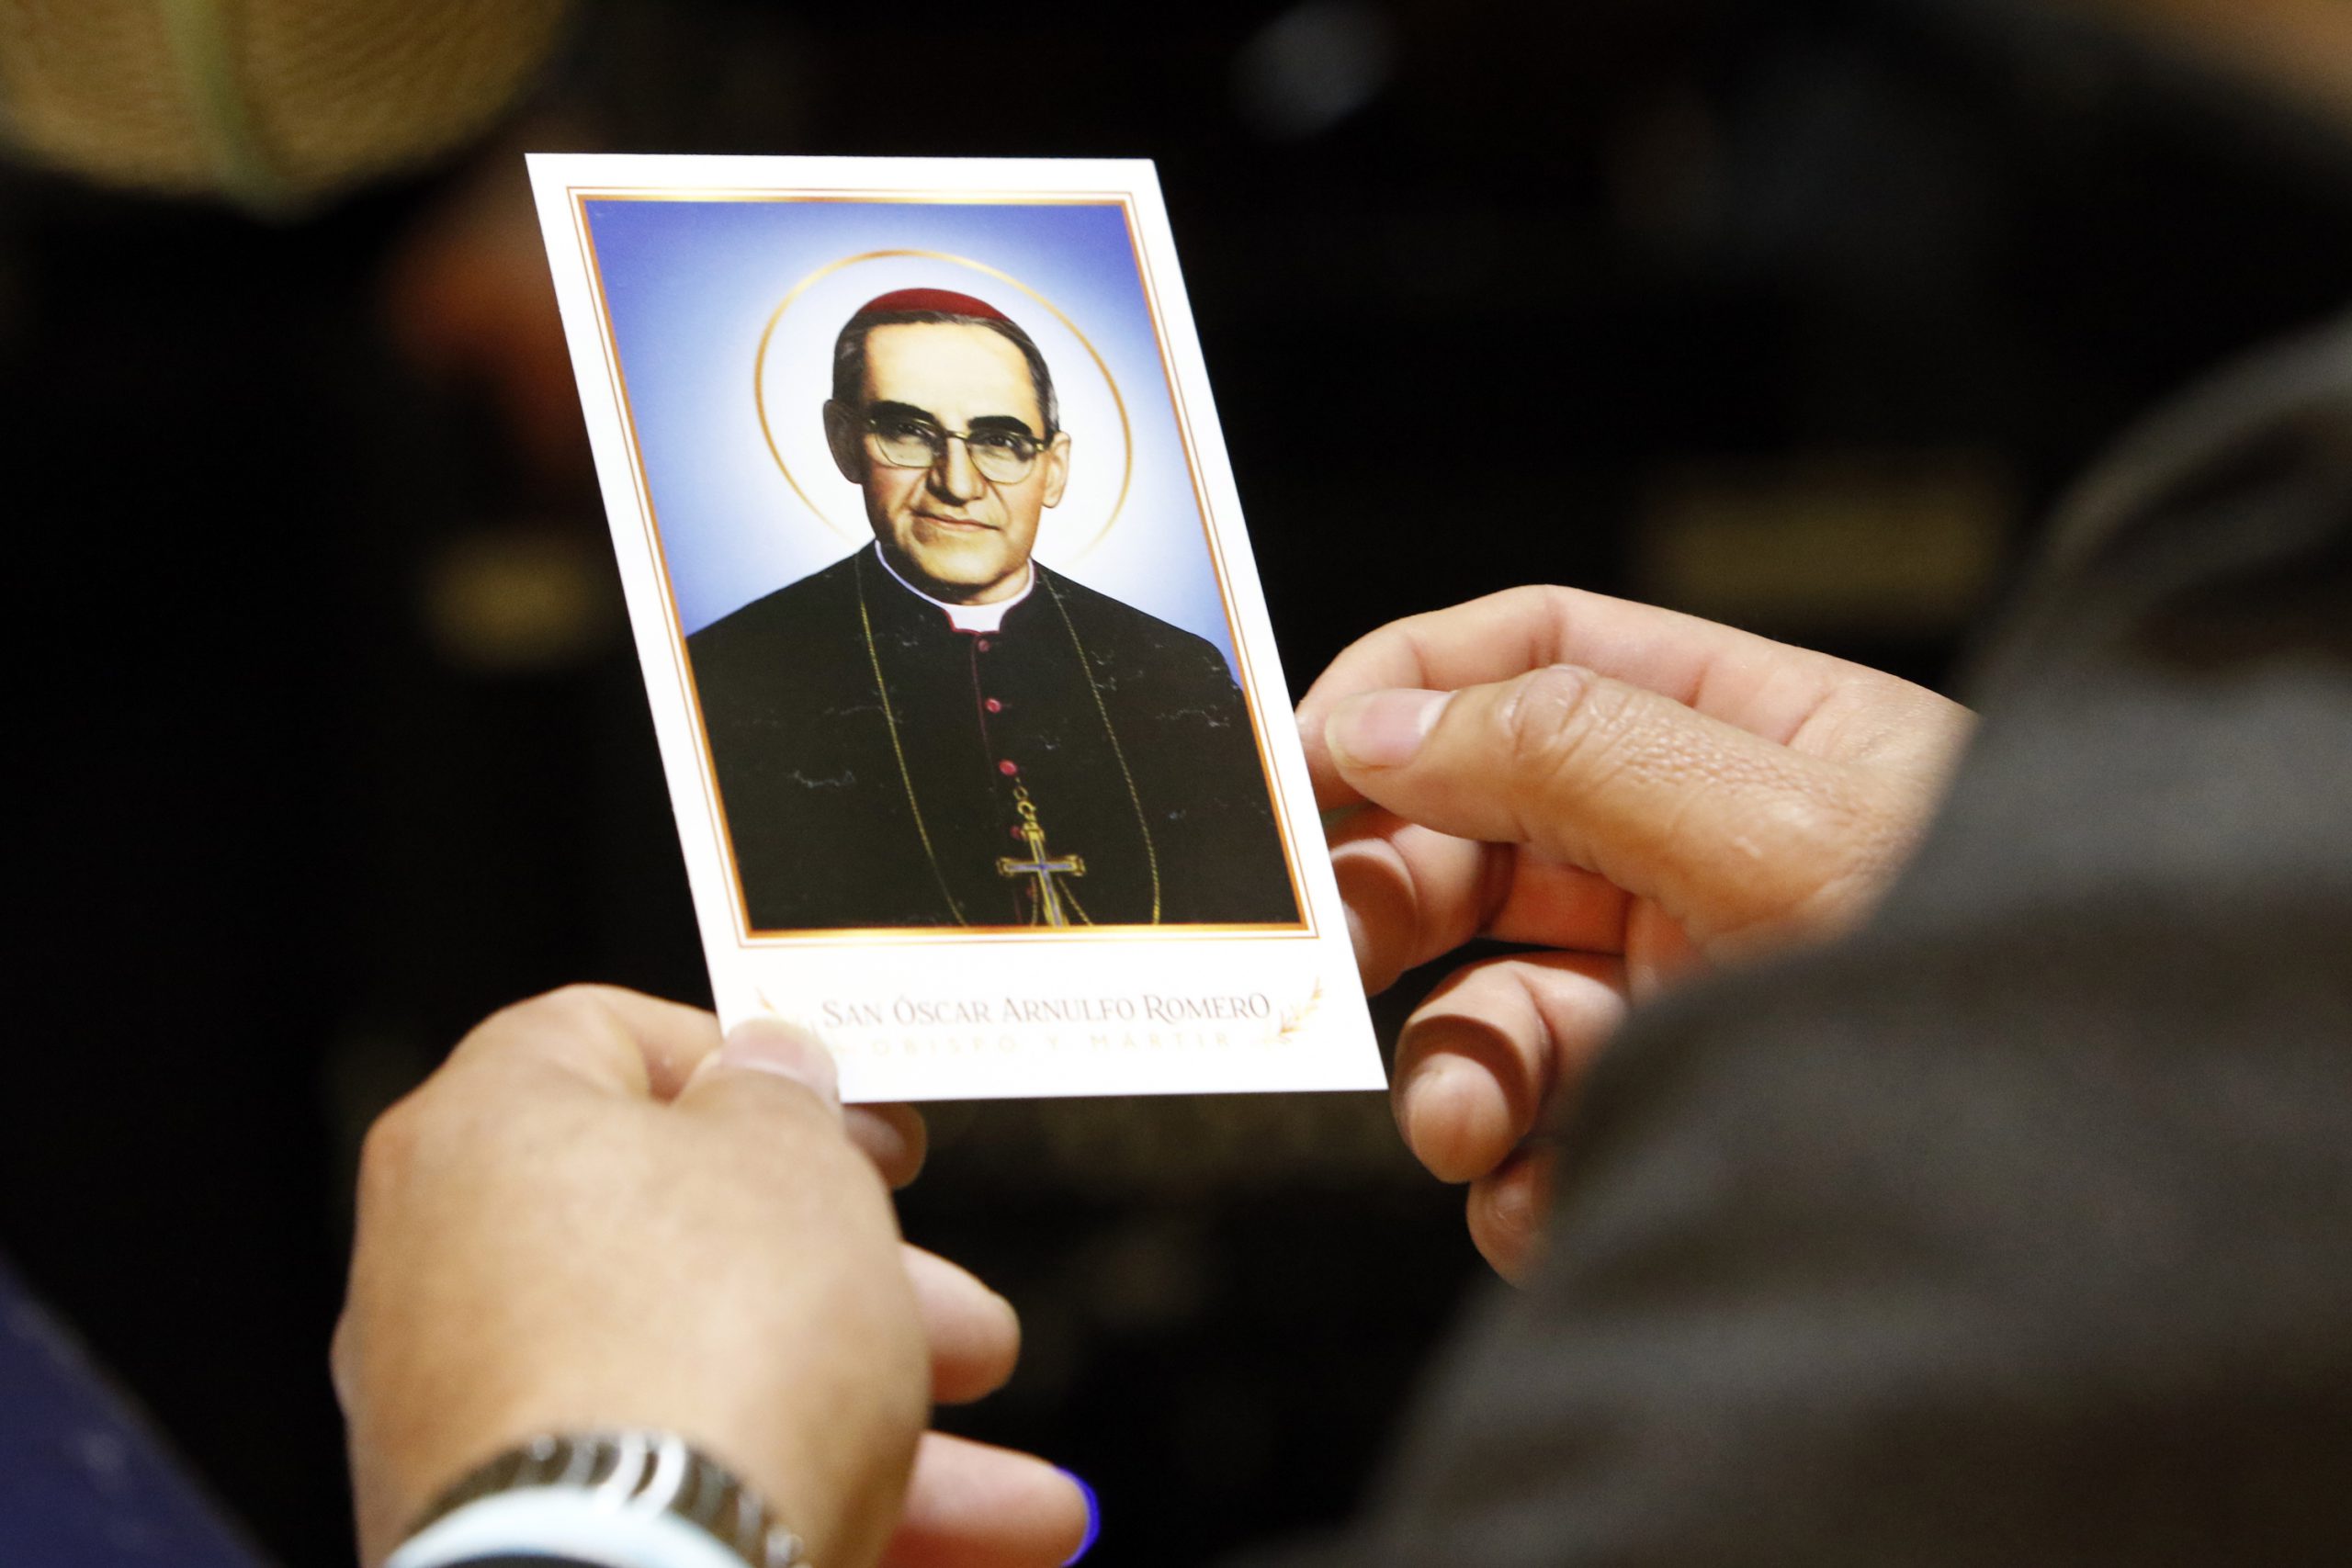 A worshipper holds a prayer card of St. Oscar Romero during a Spanish-language Mass Oct. 14 at Our Lady of Loretto Church in Hempstead, N.Y. The parish ministers to one of the largest communities of Salvadoran immigrants in the U.S. and was celebrating the canonization of Salvadoran St. Oscar Romero and six other new saints canonized at the Vatican. (CNS photo/Gregory A. Shemitz)